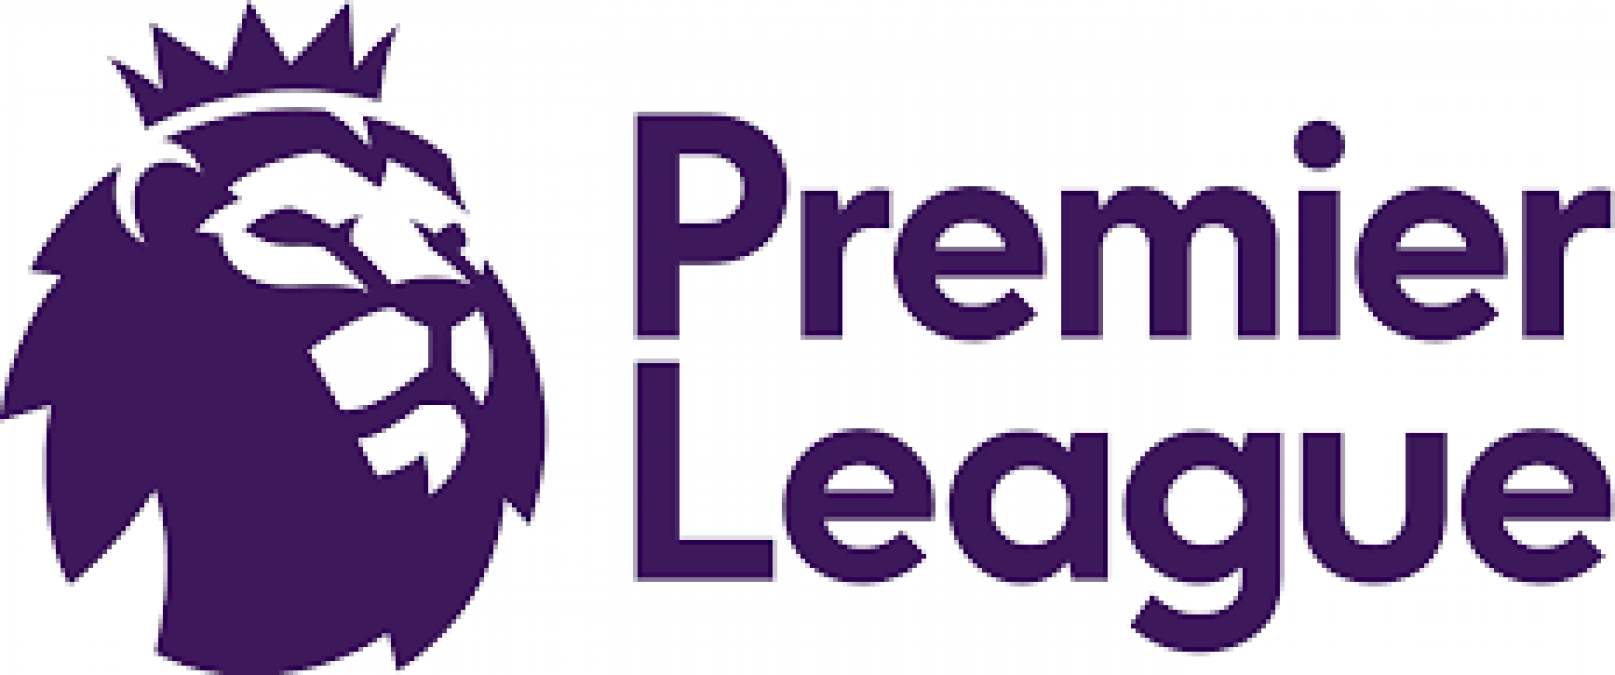 Government has not approved English Premier League yet